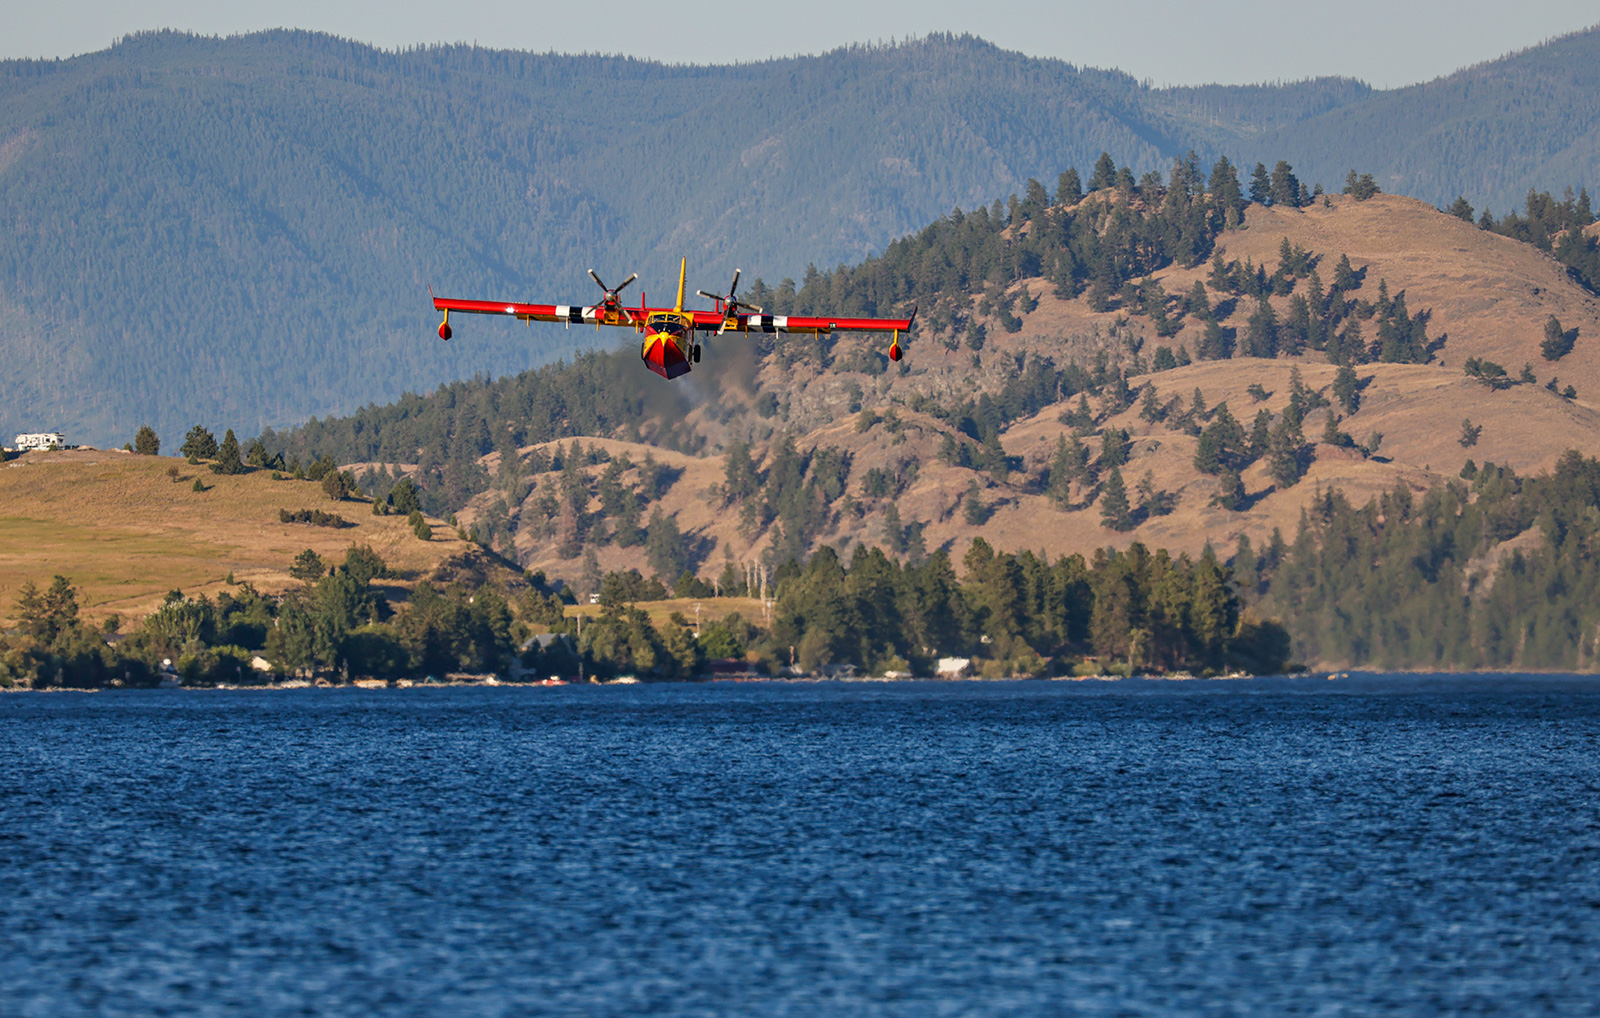 Firefighters, Aided by 600,000 Gallons of Water Air Drops, Slow the Elmo Fire - Flathead Beacon